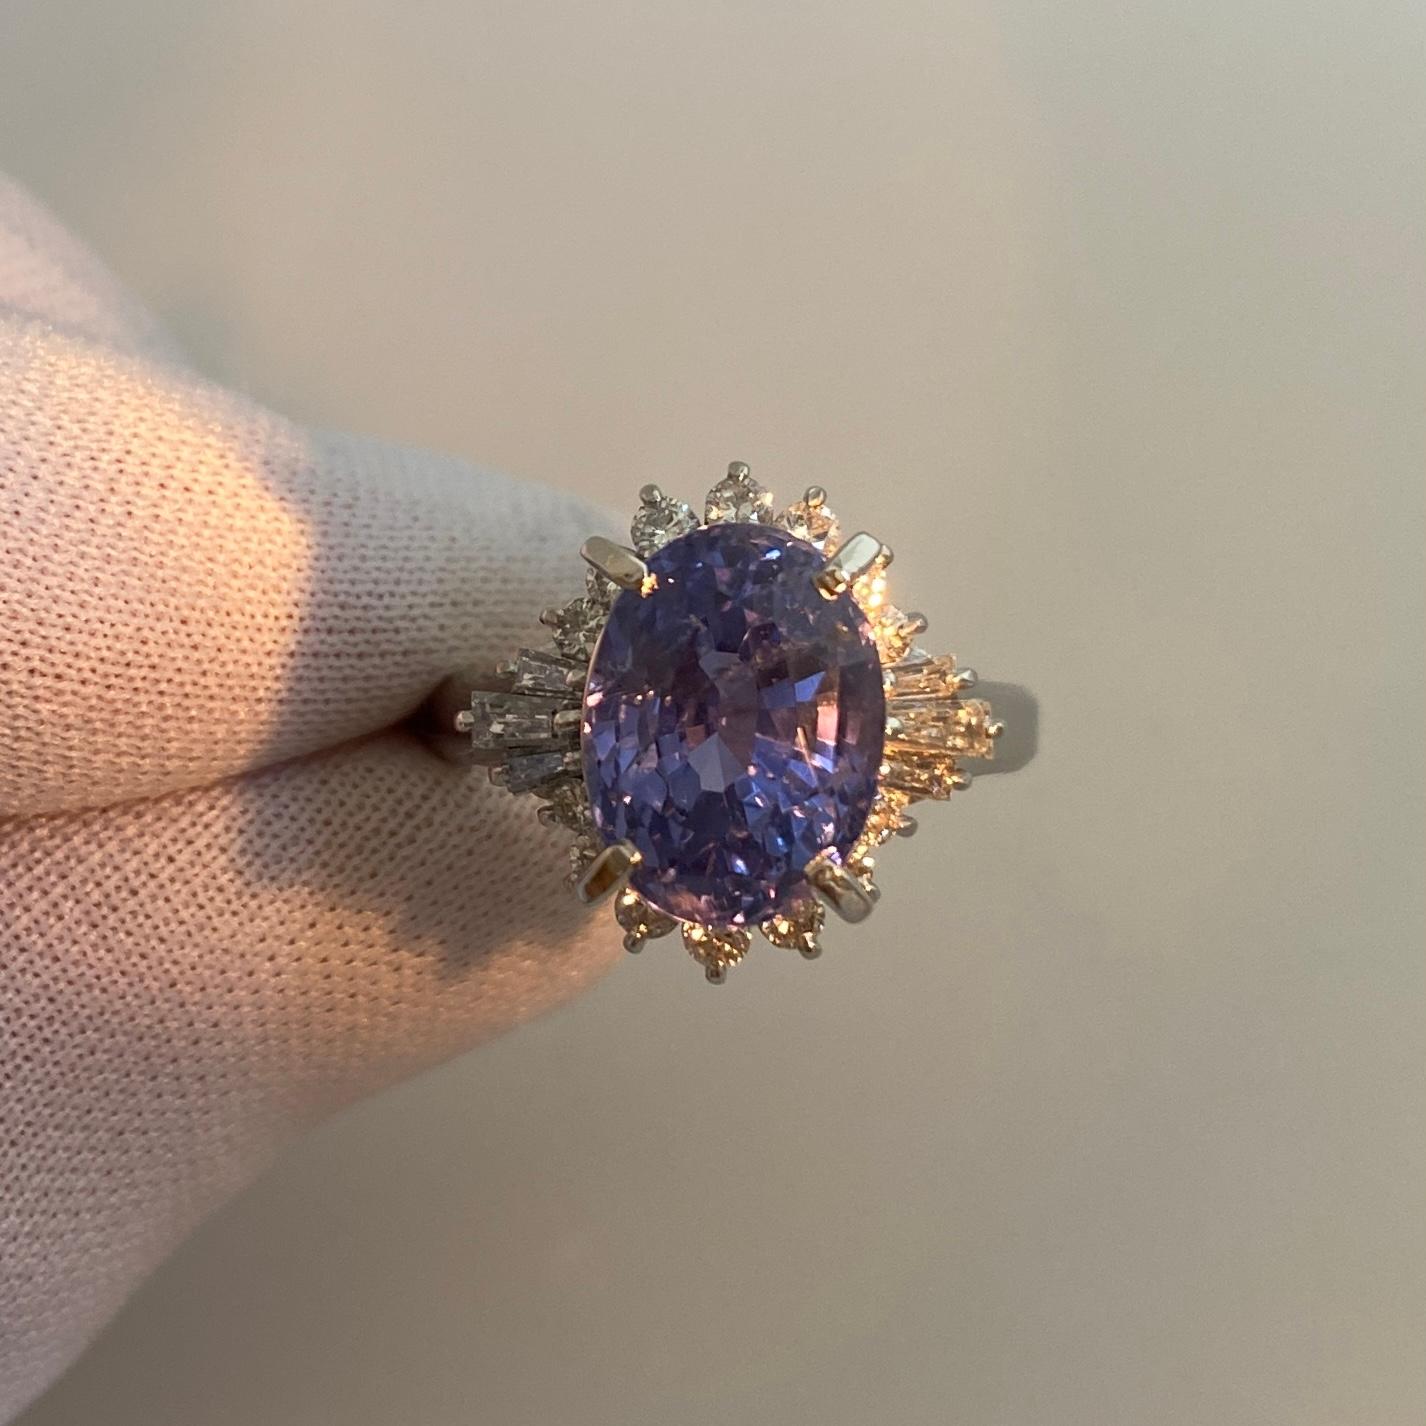 GIA Certified 7.08 Carat Untreated Color Change Sapphire & Diamond Cocktail Ring For Sale 3